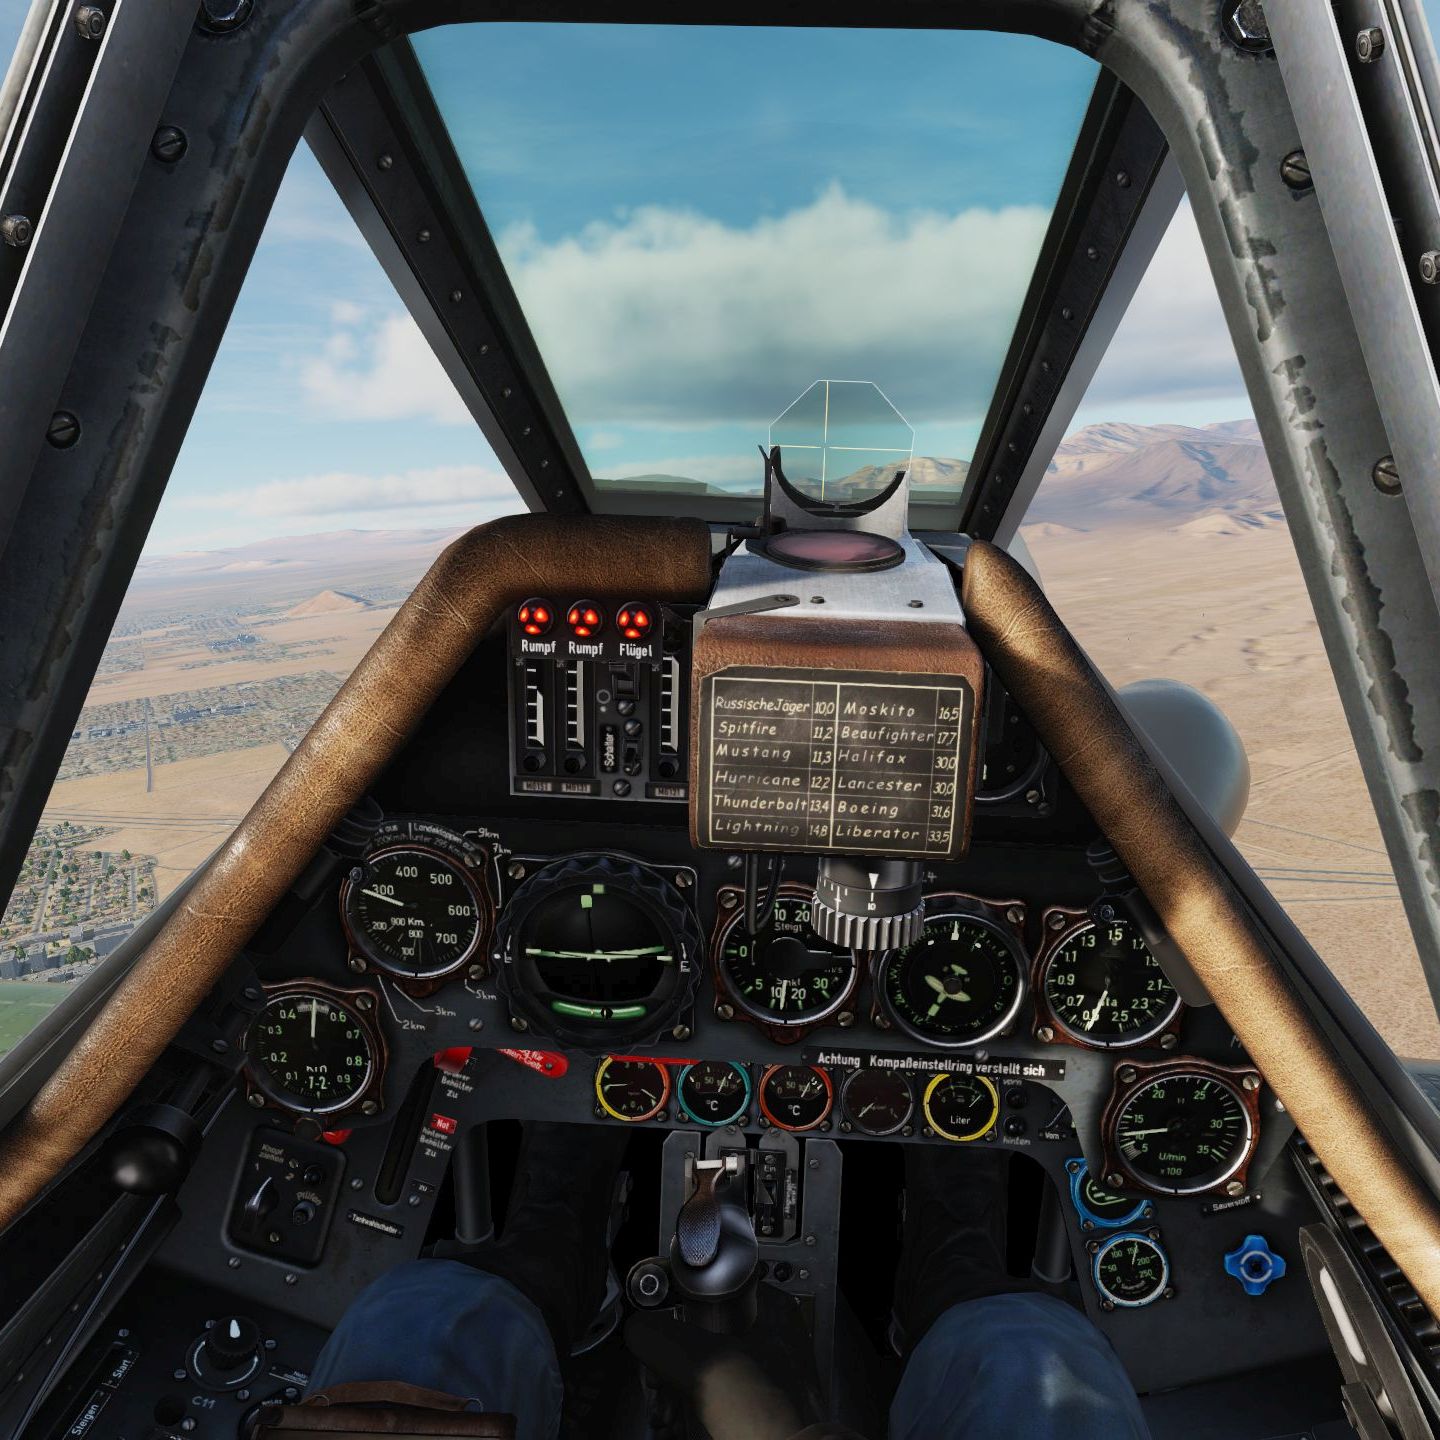 Pato's FW190D9 Cockpit Mod with reworked instruments